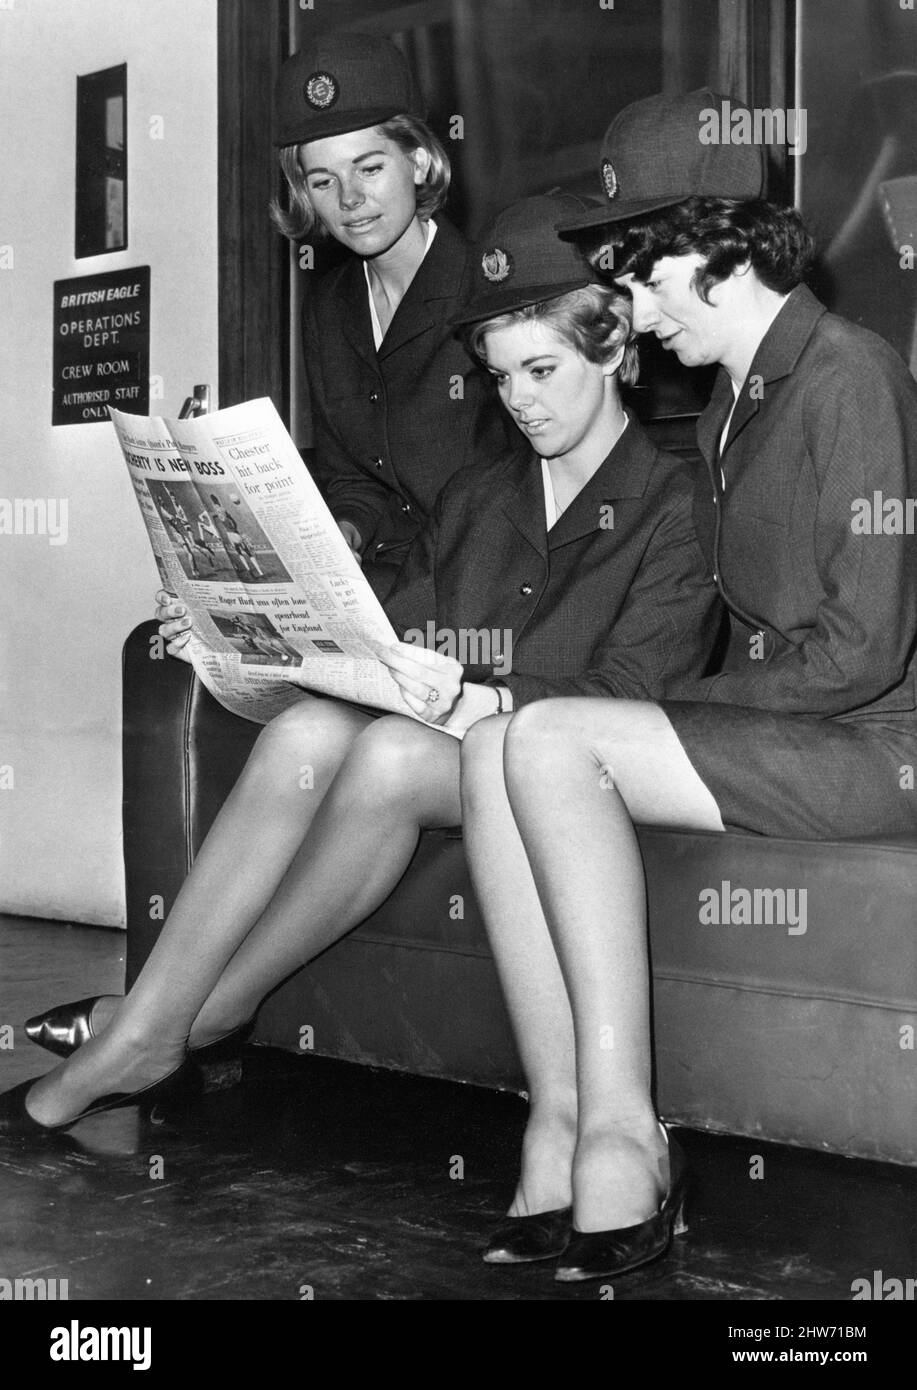 British Eagle International Airlines a major British independent airline that operated from 1948 until it went into liquidation in 1968. Our Picture Shows ... Three British Eagle stewardesses read the news of the airline's closure, Thursday 7th November 1968.  British Eagle and its sister companies ceased trading at midnight on 6th November 1968 due to growing financial problems and went into voluntary liquidation two days later. Stock Photo